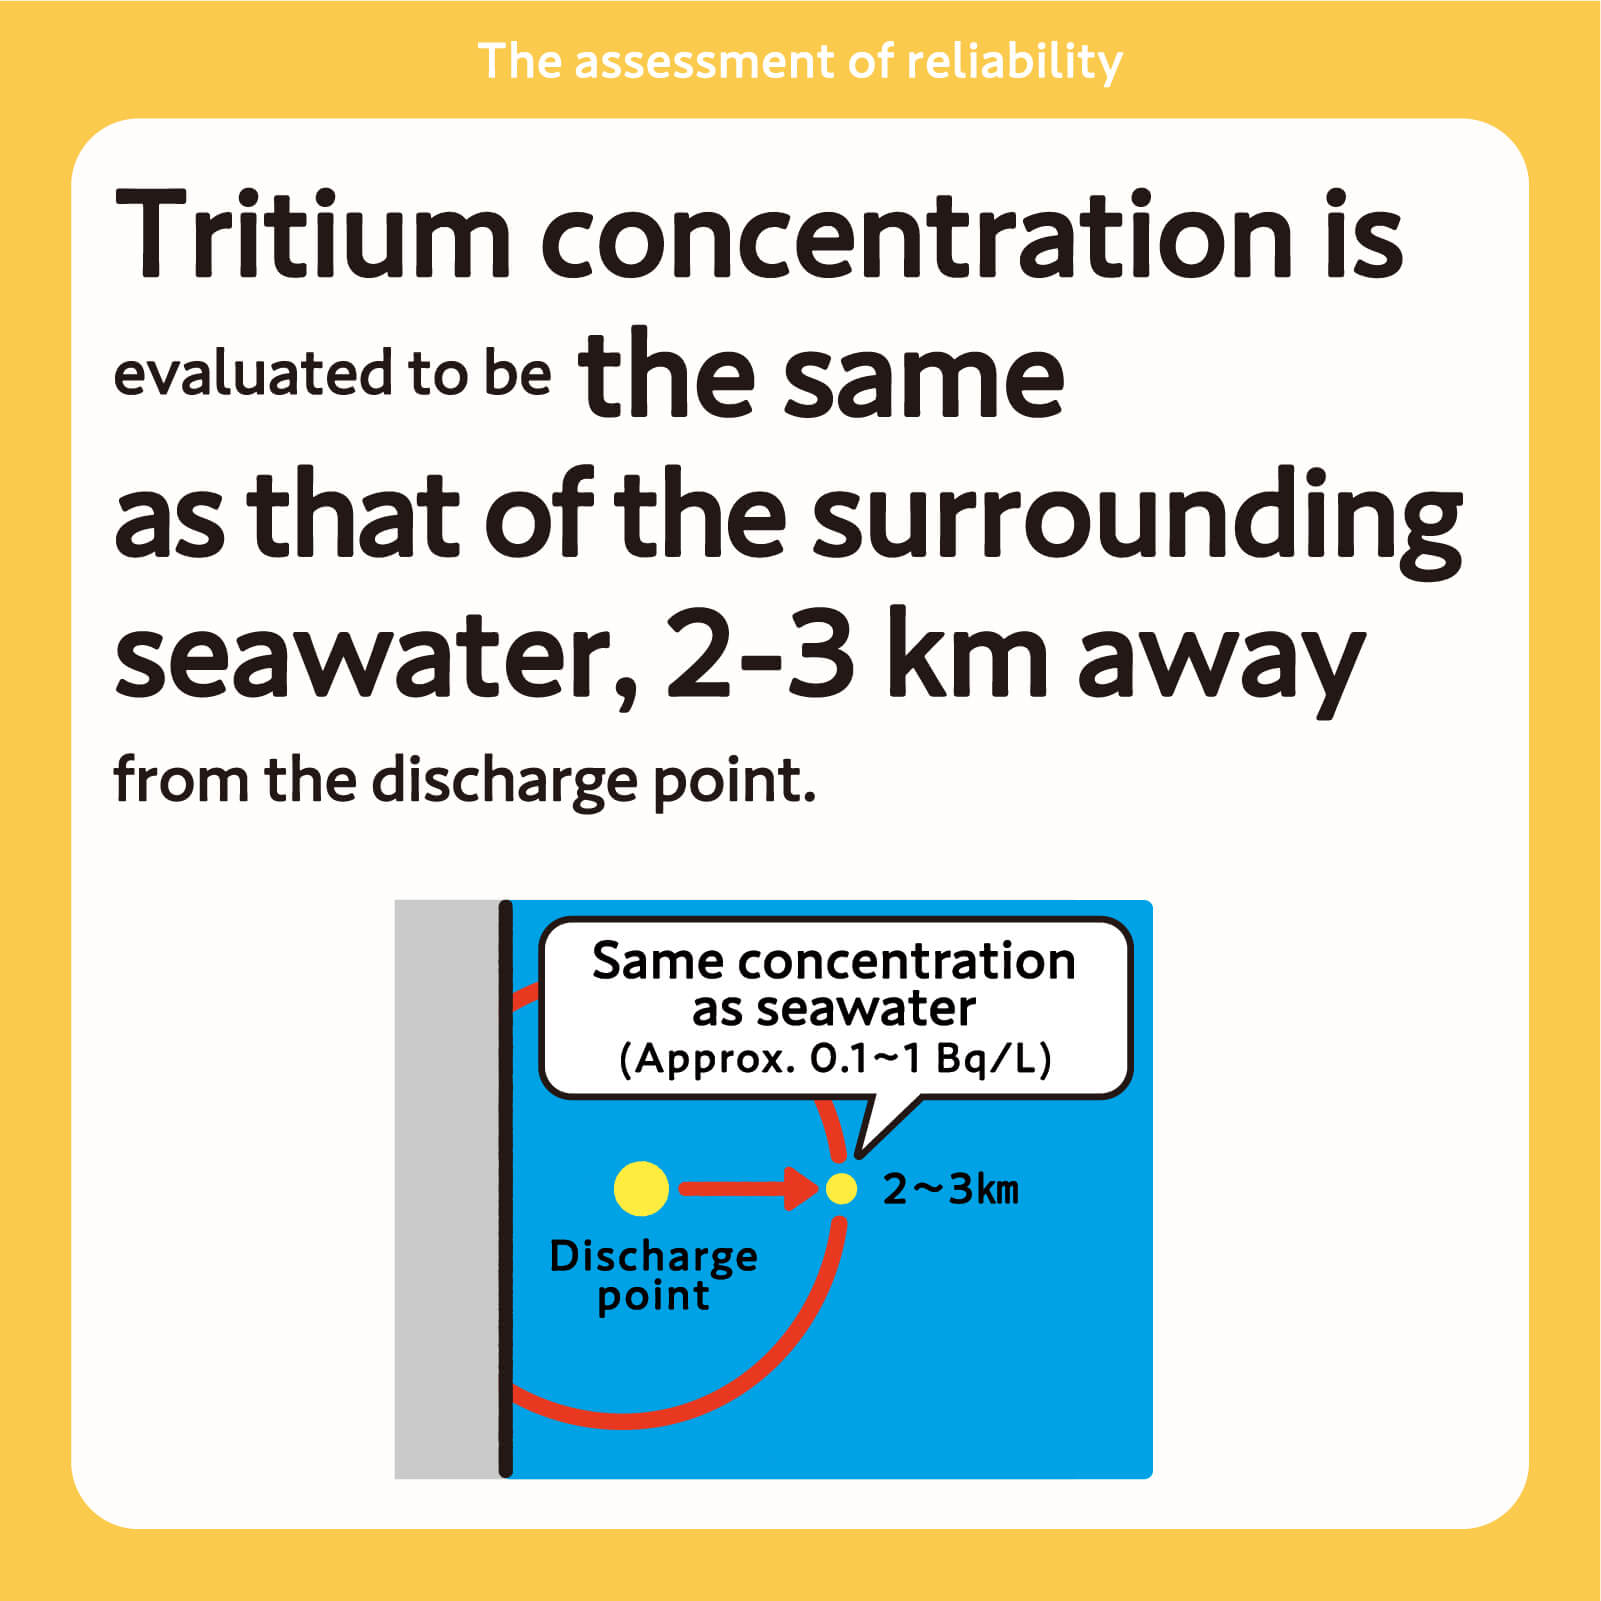 Tritium concentration is evaluated to be the same as that of the surrounding seawater, 2-3 km away from the discharge point.